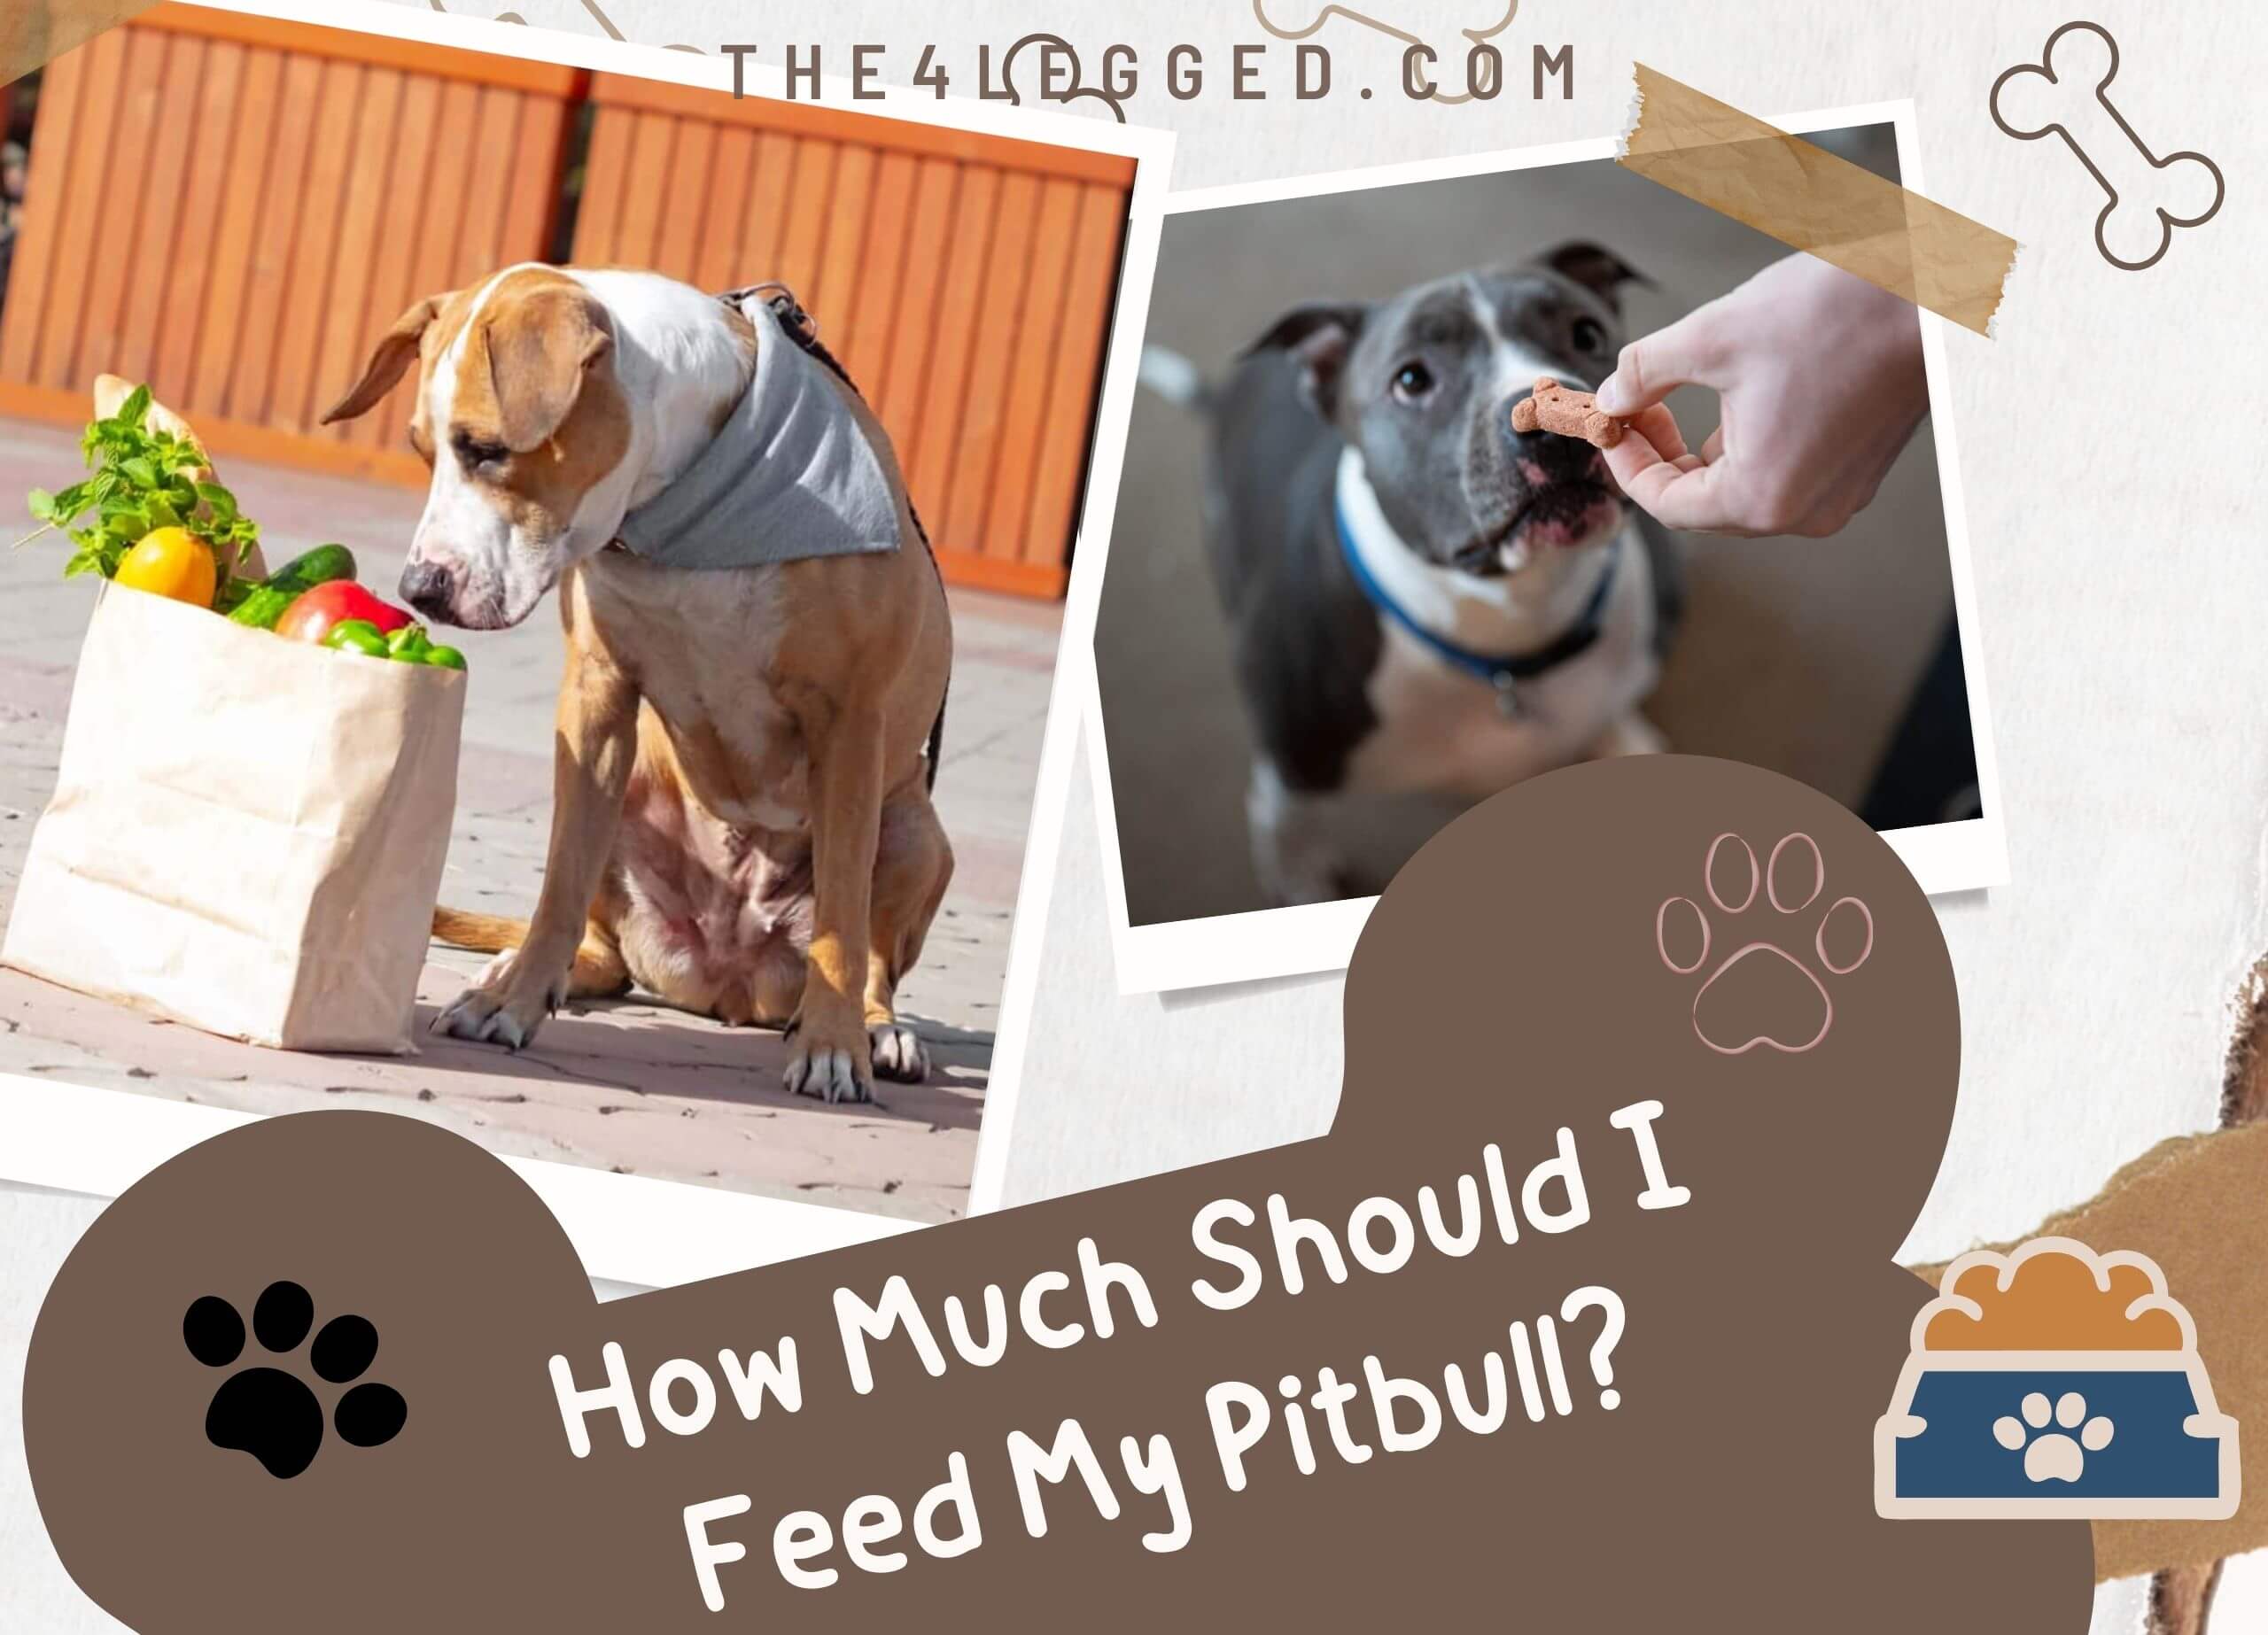 How-Much-Should-I-Feed-My-Pitbull-1